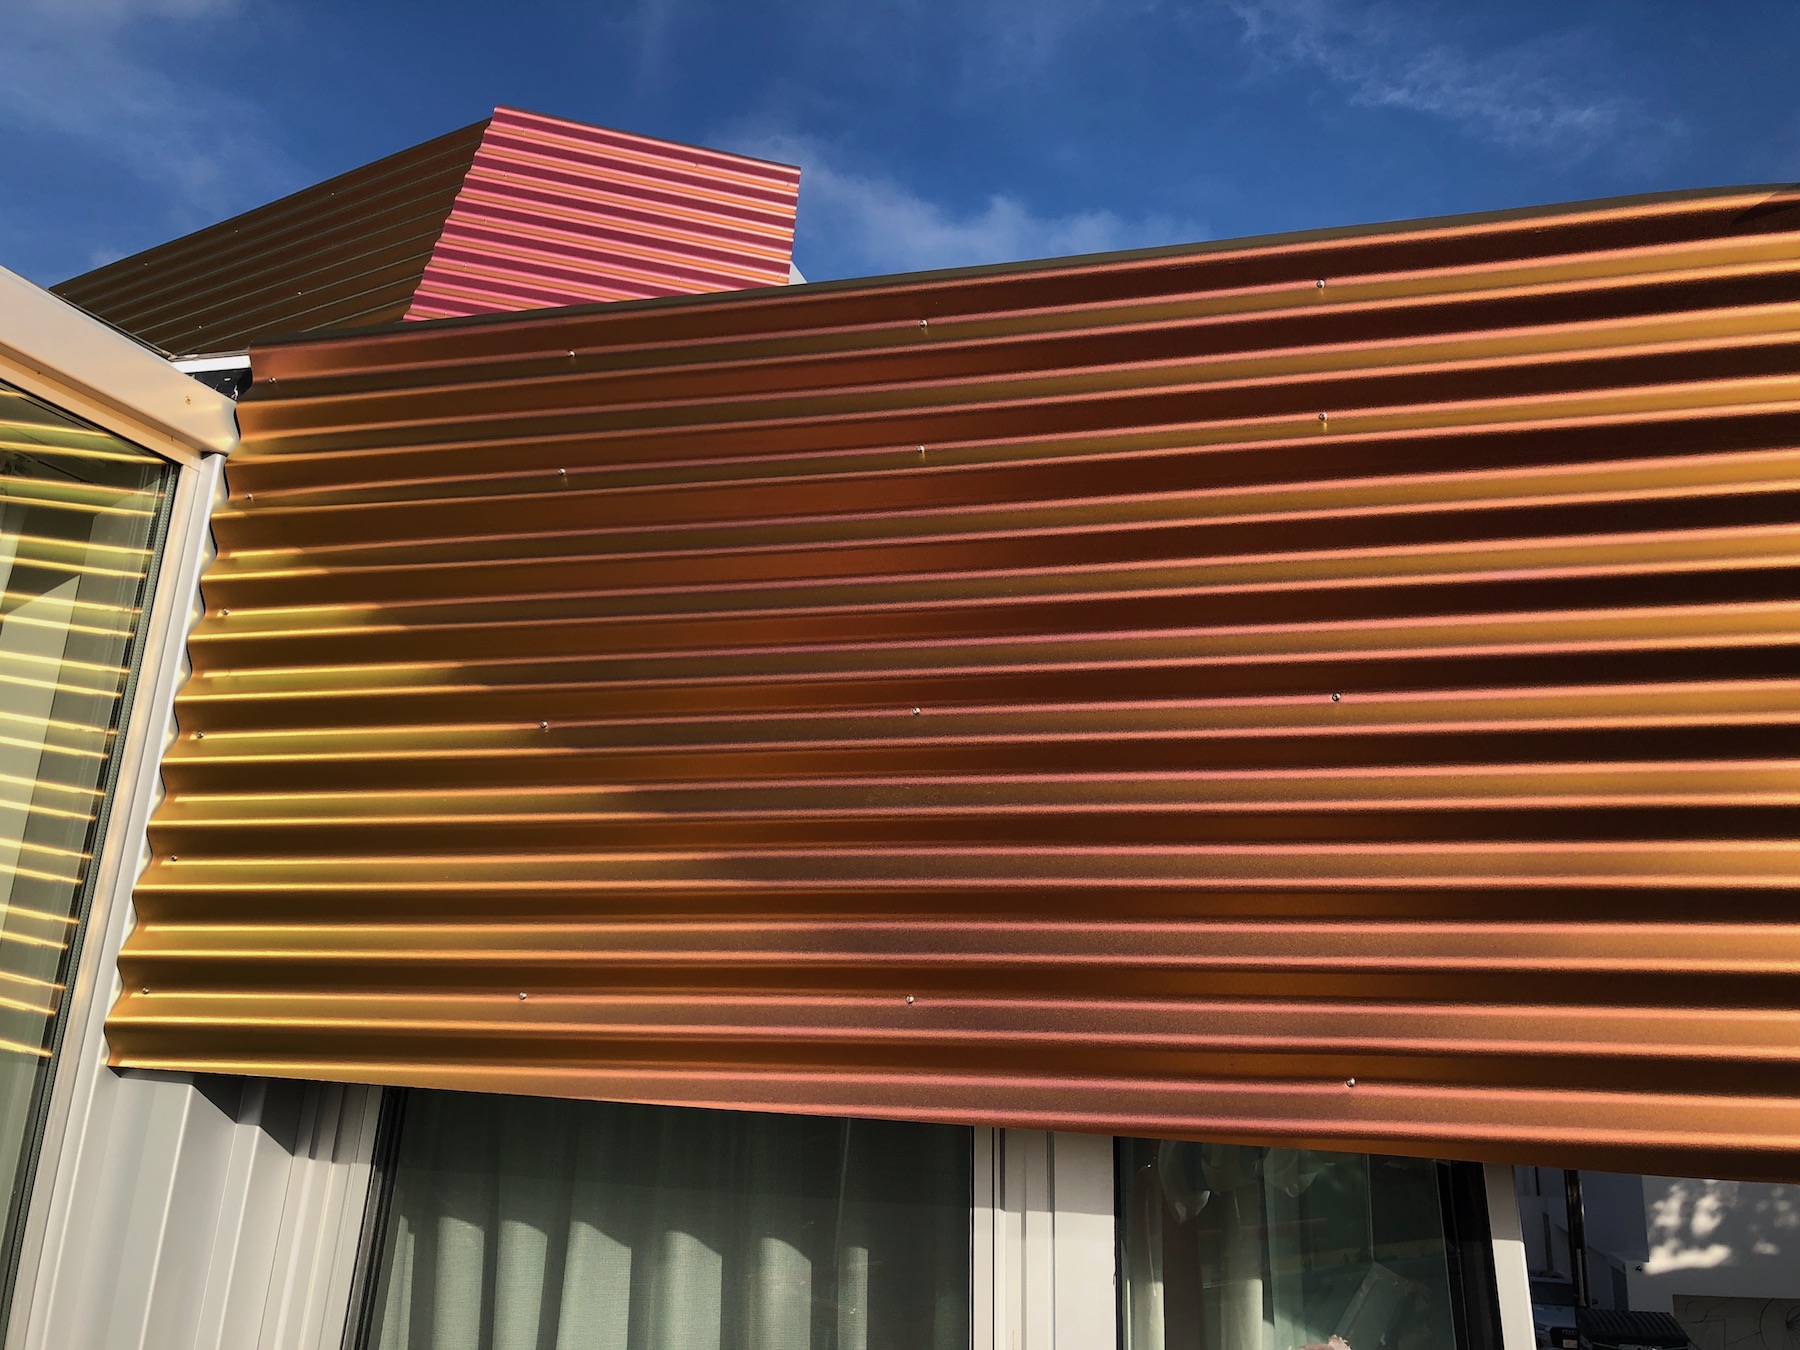 Vivatious colors on the panels at different angles